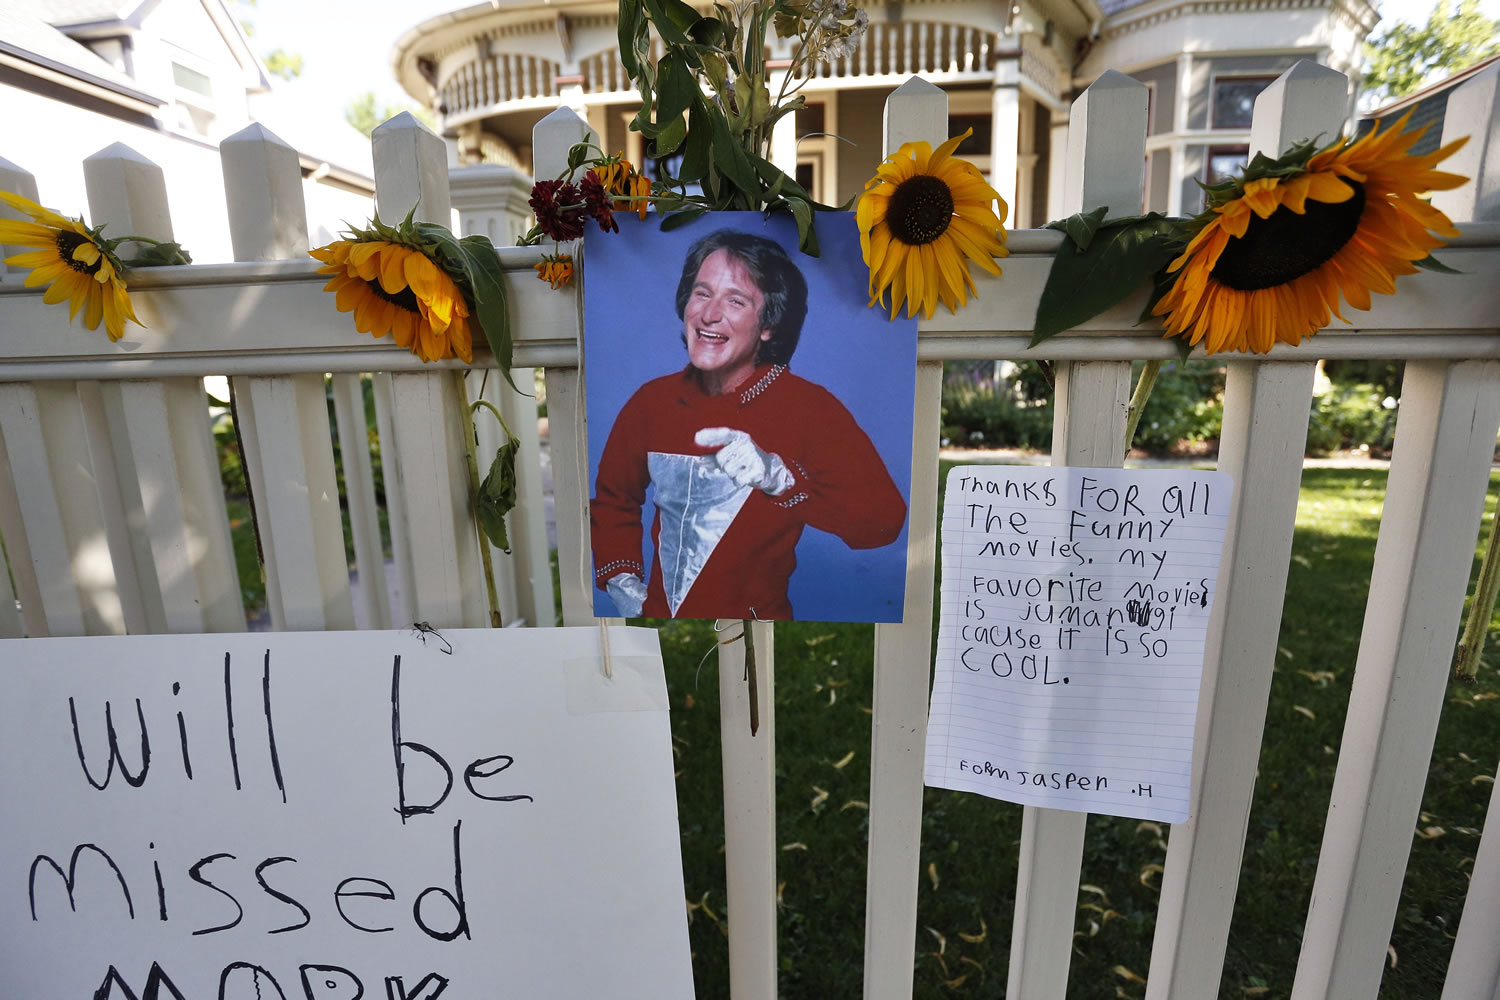 A photo of the late actor Robin Williams playing Mork from Ork hangs with flowers and notes left by people paying their respects at a makeshift  memorial in Boulder, Colo., on Tuesday, outside the home where the 80s TV series &quot;Mork &amp; Mindy,&quot; starring Williams, was set. Williams, the Academy Award winner and comic supernova whose explosions of pop culture riffs and impressions dazzled audiences for decades and made him a gleamy-eyed laureate for the Information Age, committed suicide Monday. He was 63.